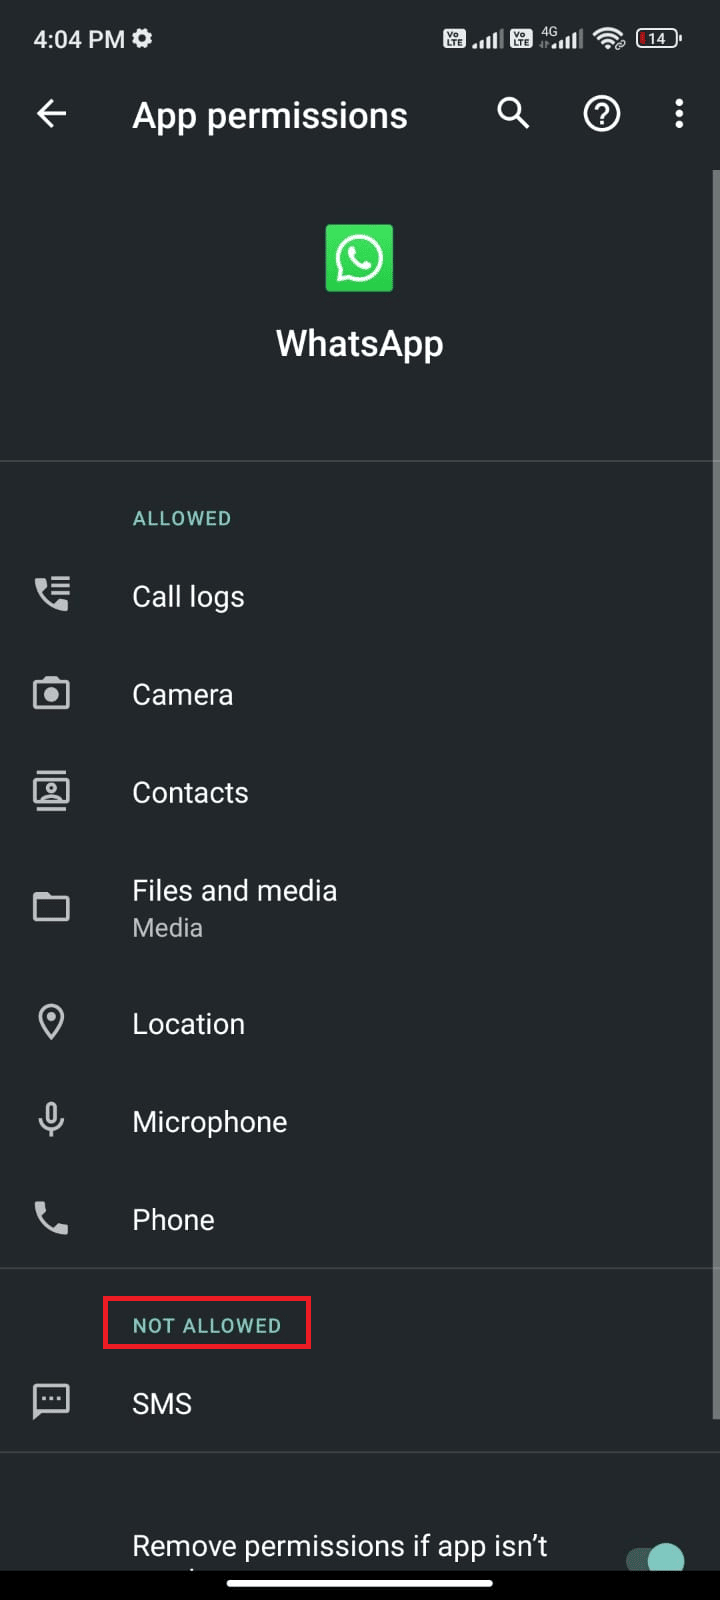 If some permissions are pending in the NOT ALLOWED LIST then tap that option